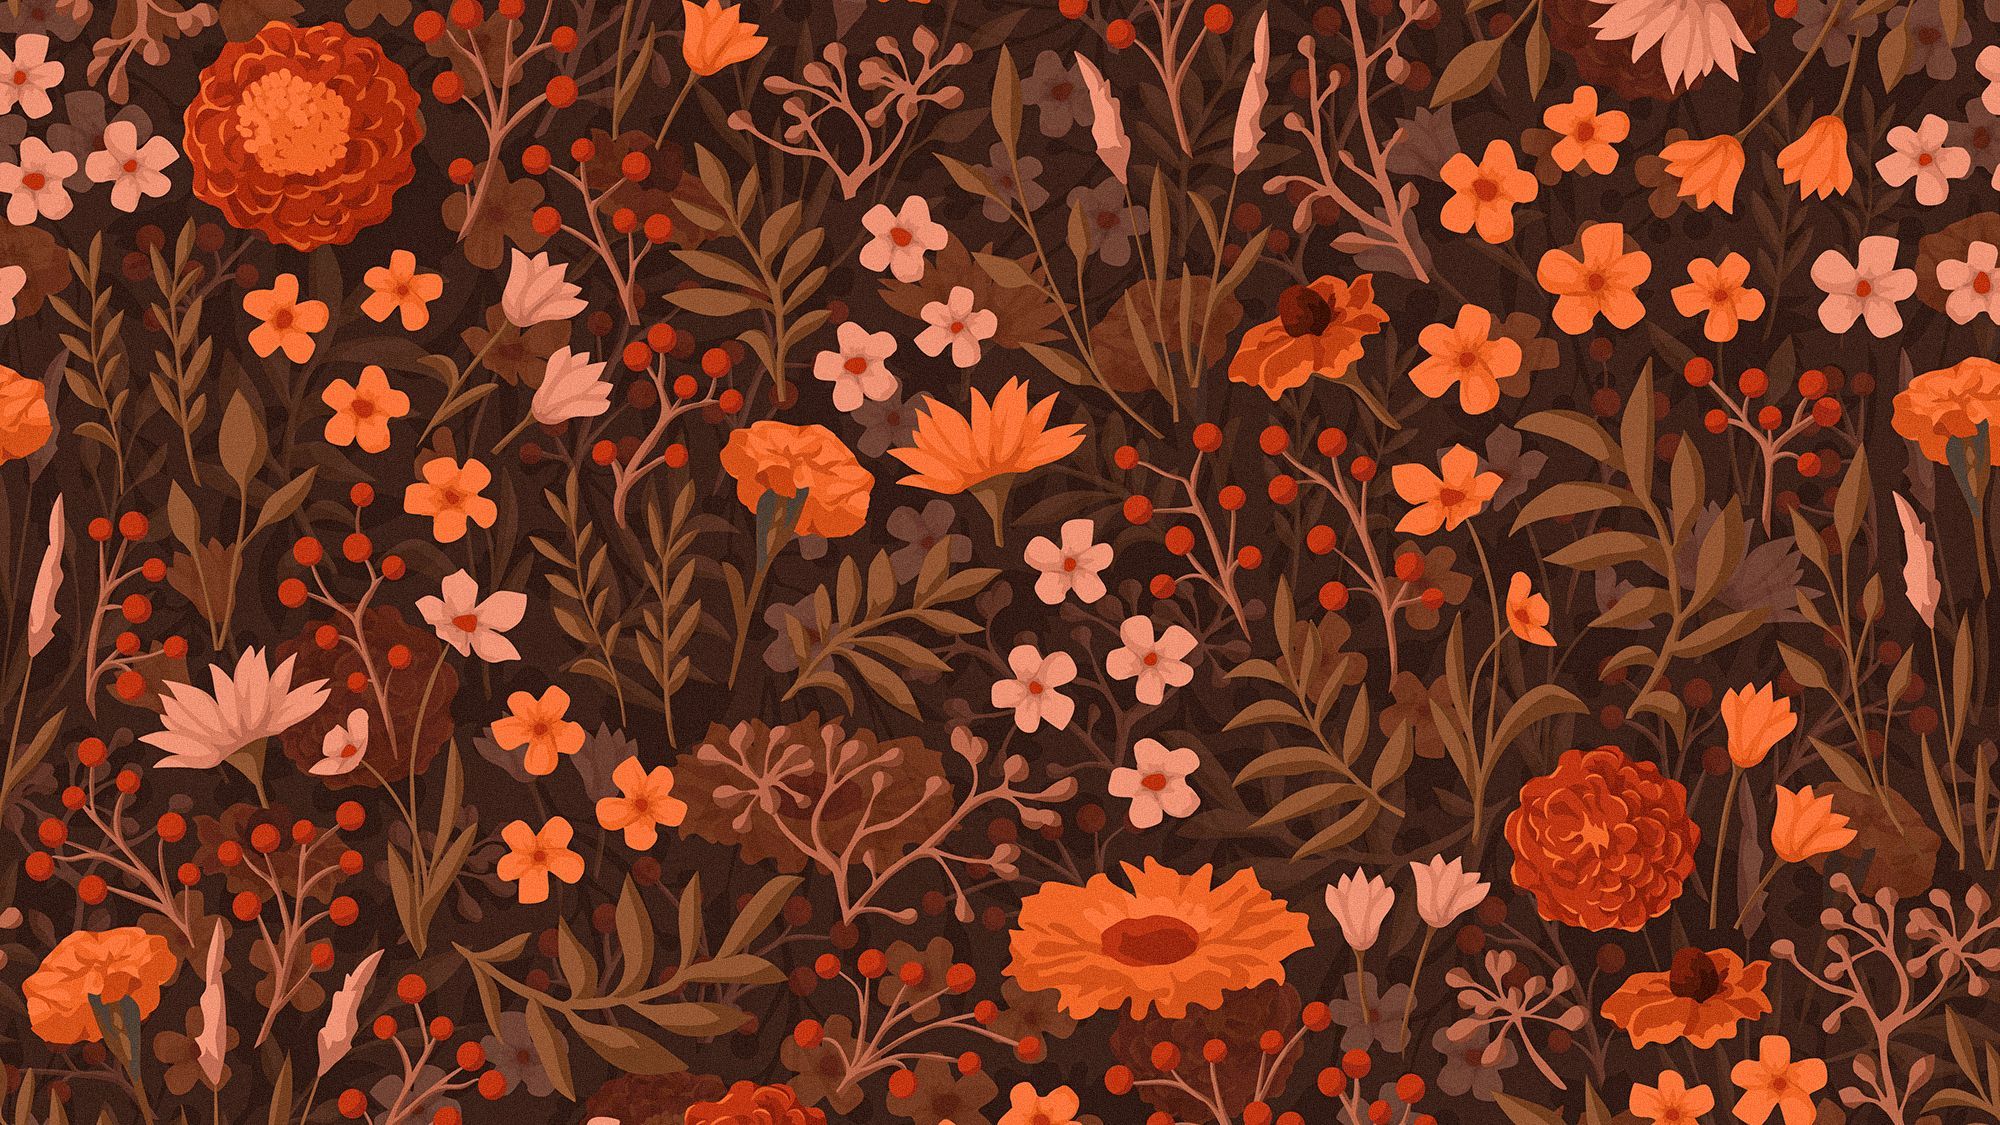 A brown wallpaper with orange and white flowers - Vintage fall